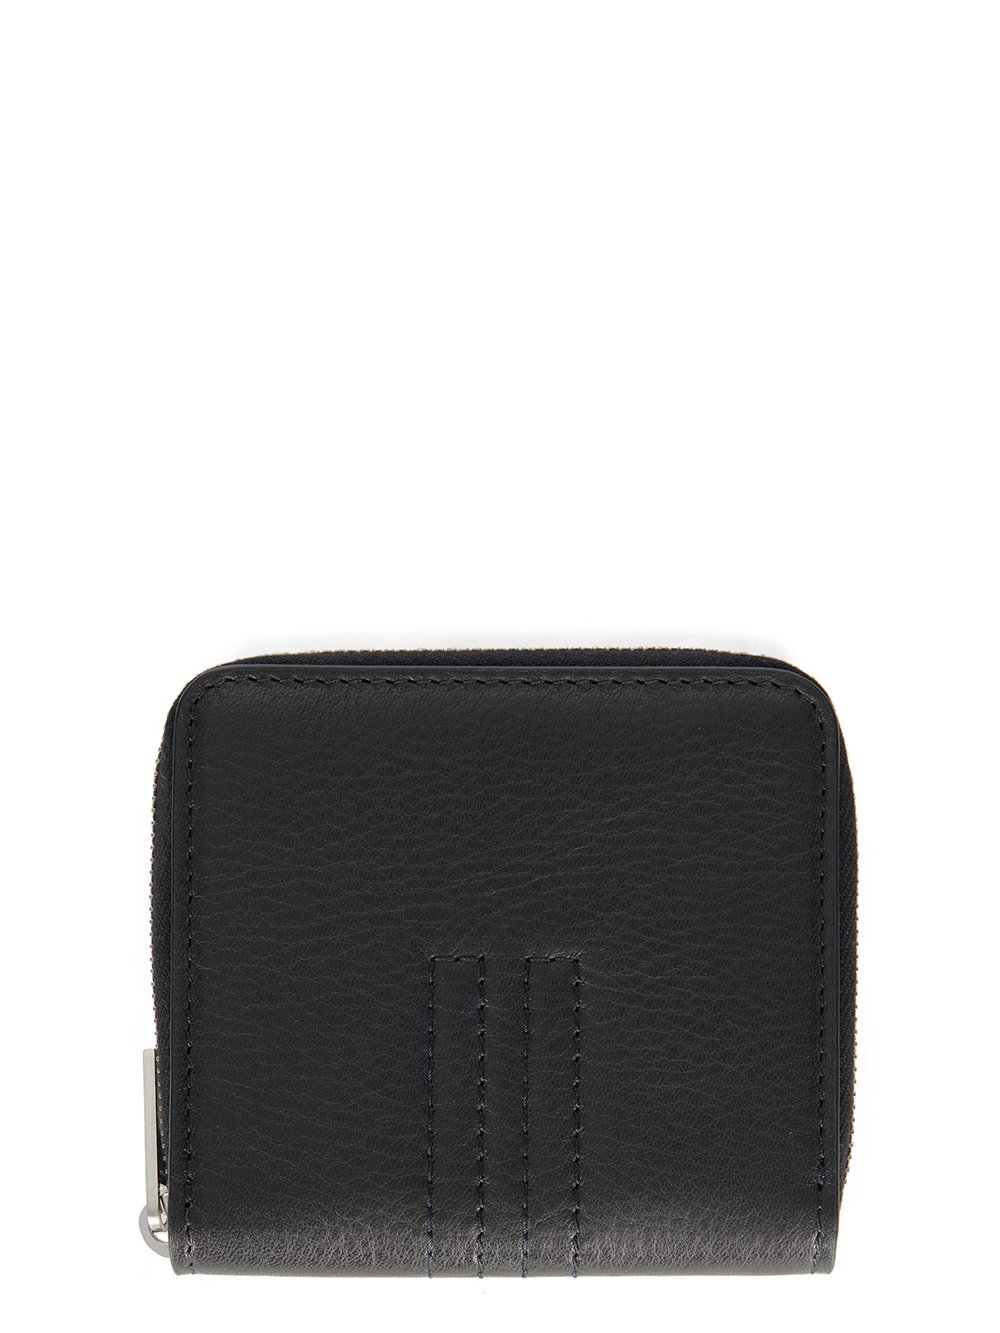 RICK OWENS FW23 LUXOR ZIPPED WALLET IN BLACK SOFT GRAIN COW LEATHER